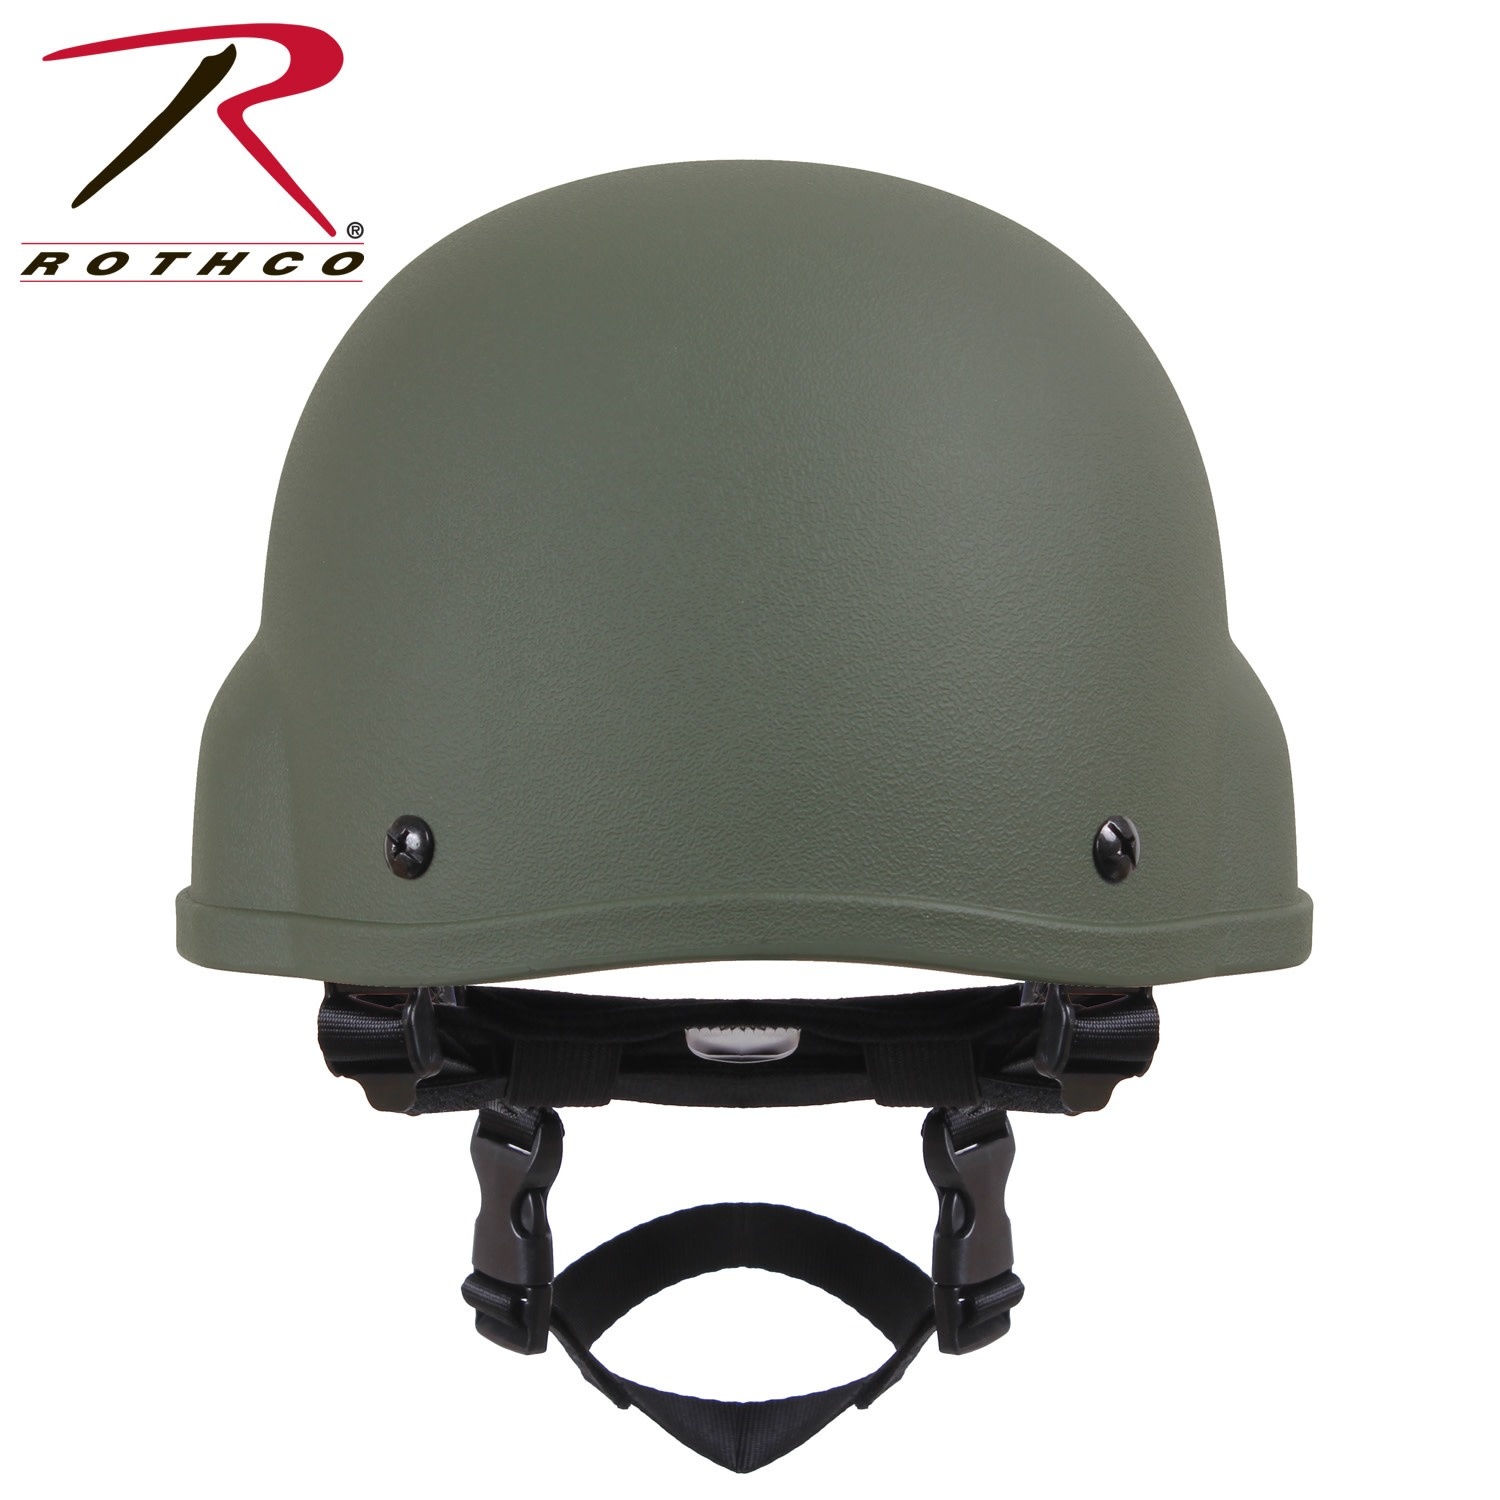 Rothco Olive Drab ABS Mich 2000 Replica Tactical Helmet